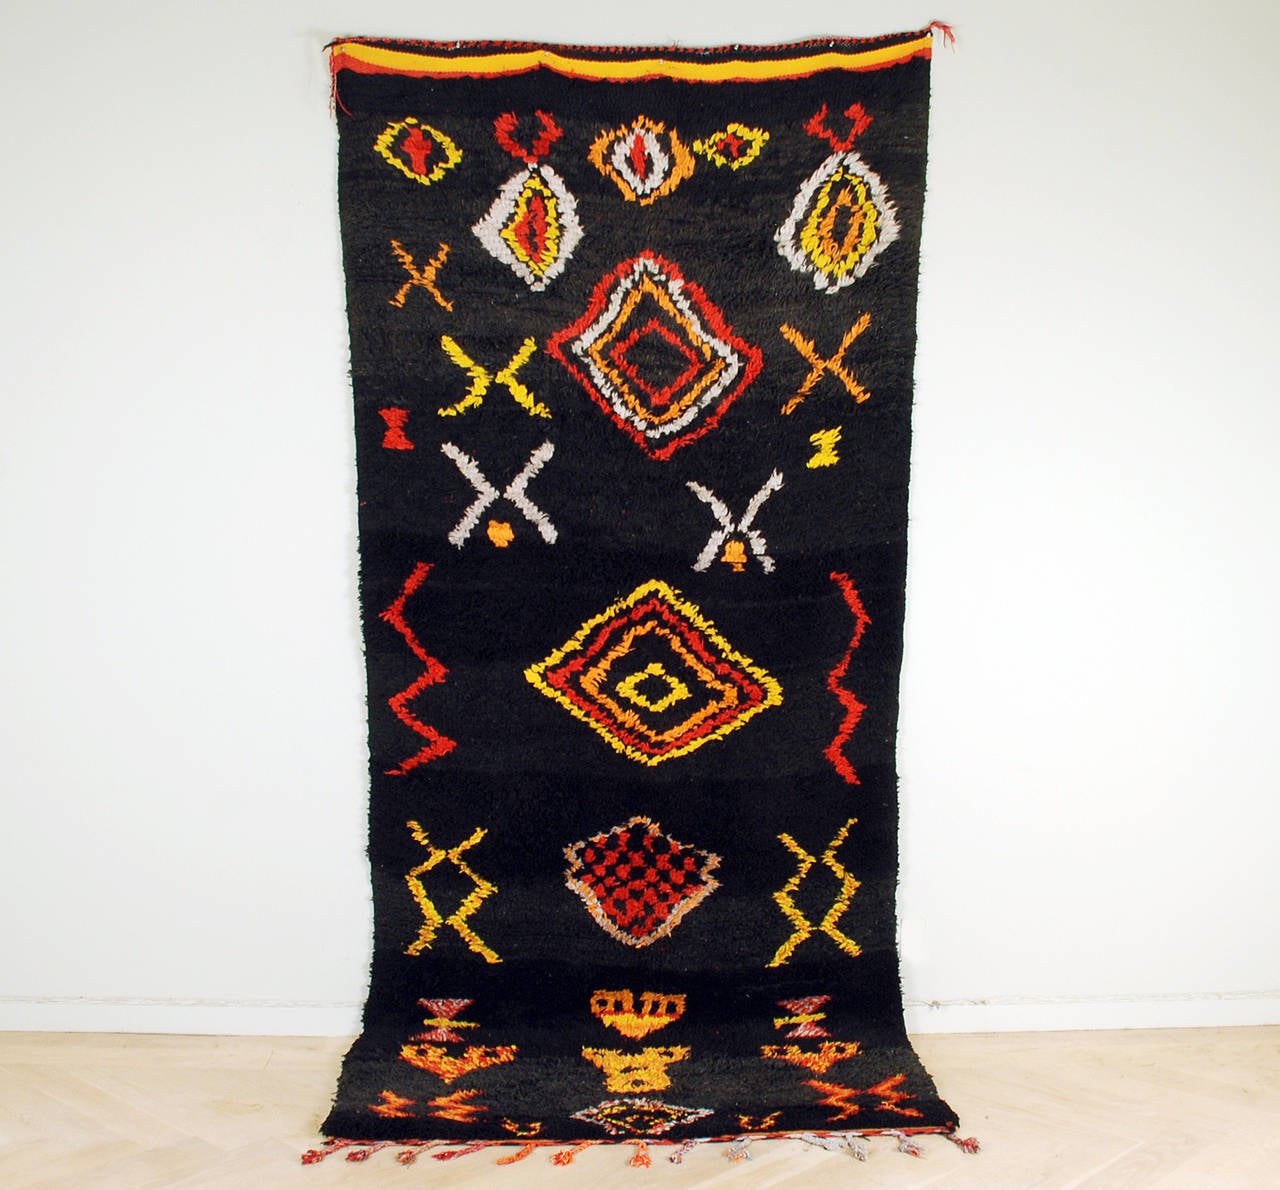 A large and impressive vintage Moroccan Berber Middle Atlas pile rug with colorful concentric diamonds and architectural motifs surrounded by a black ground and terminating into hand woven kilim ends and fringe. In overall excellent, original